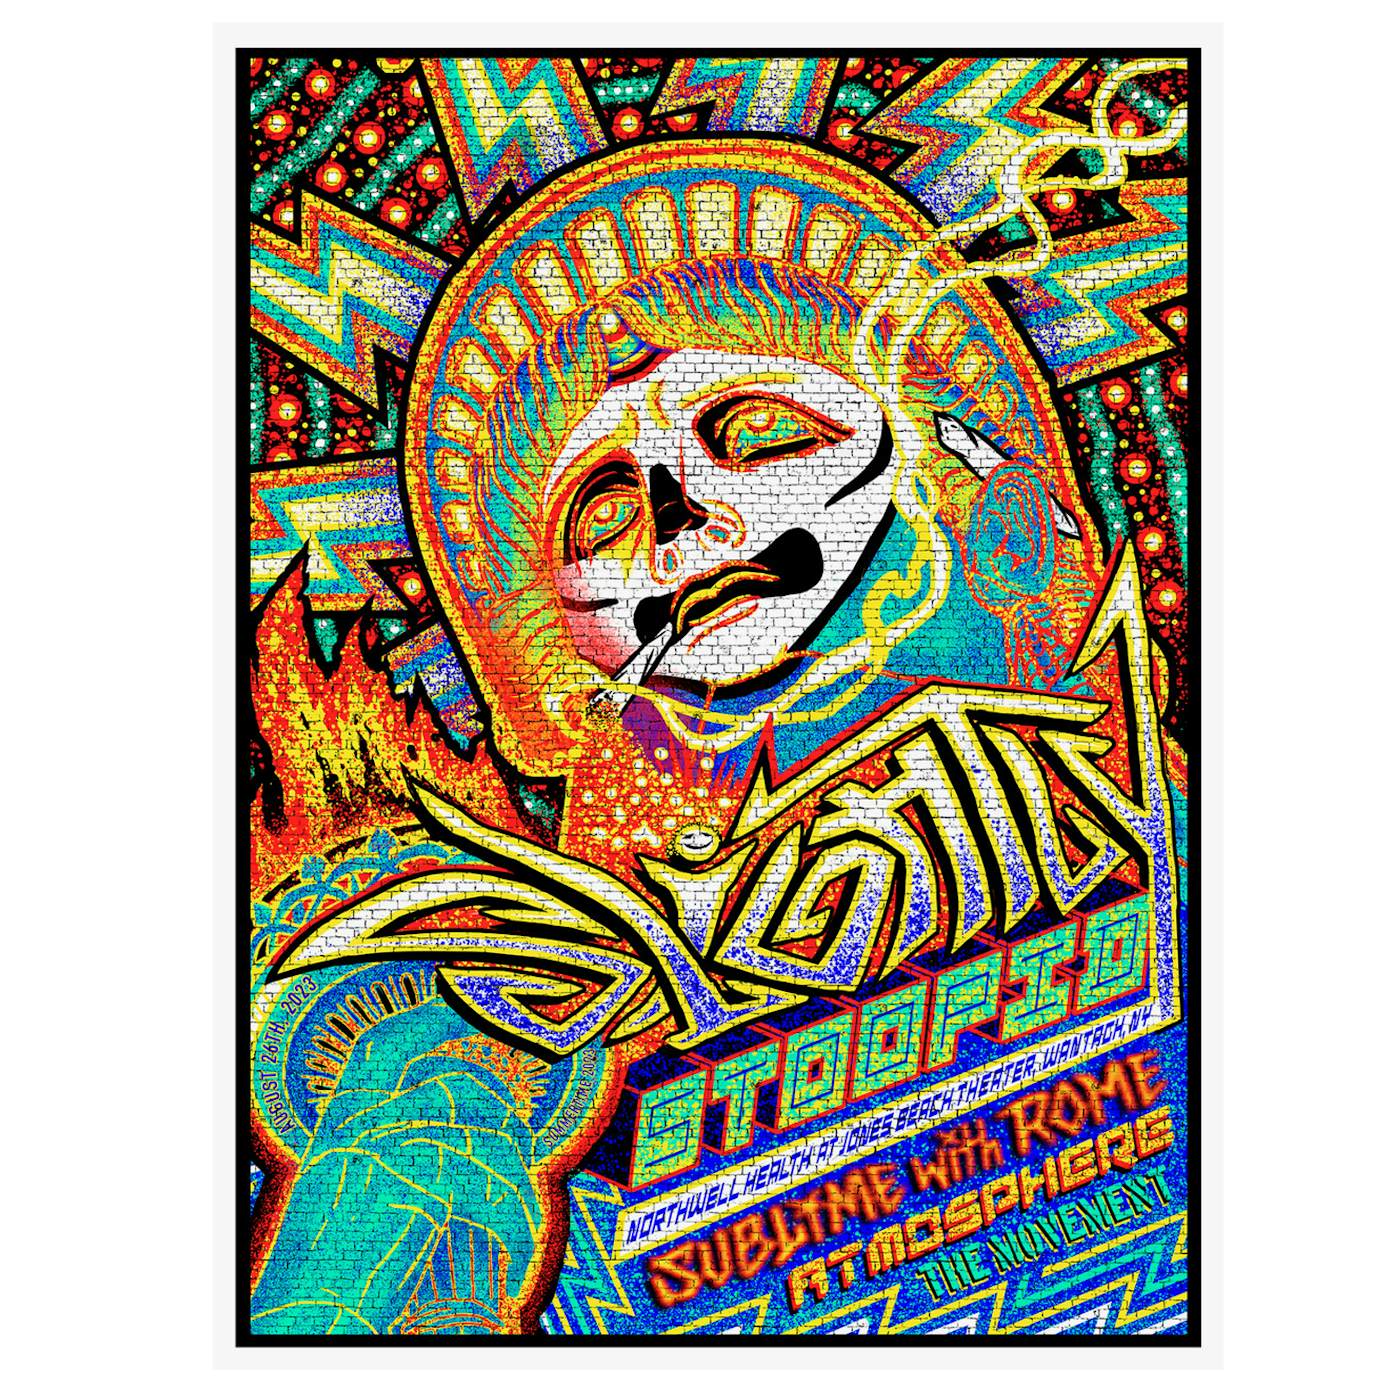 Slightly Stoopid 8/26/23 Wantagh, NY Show Poster by Brad Klausen